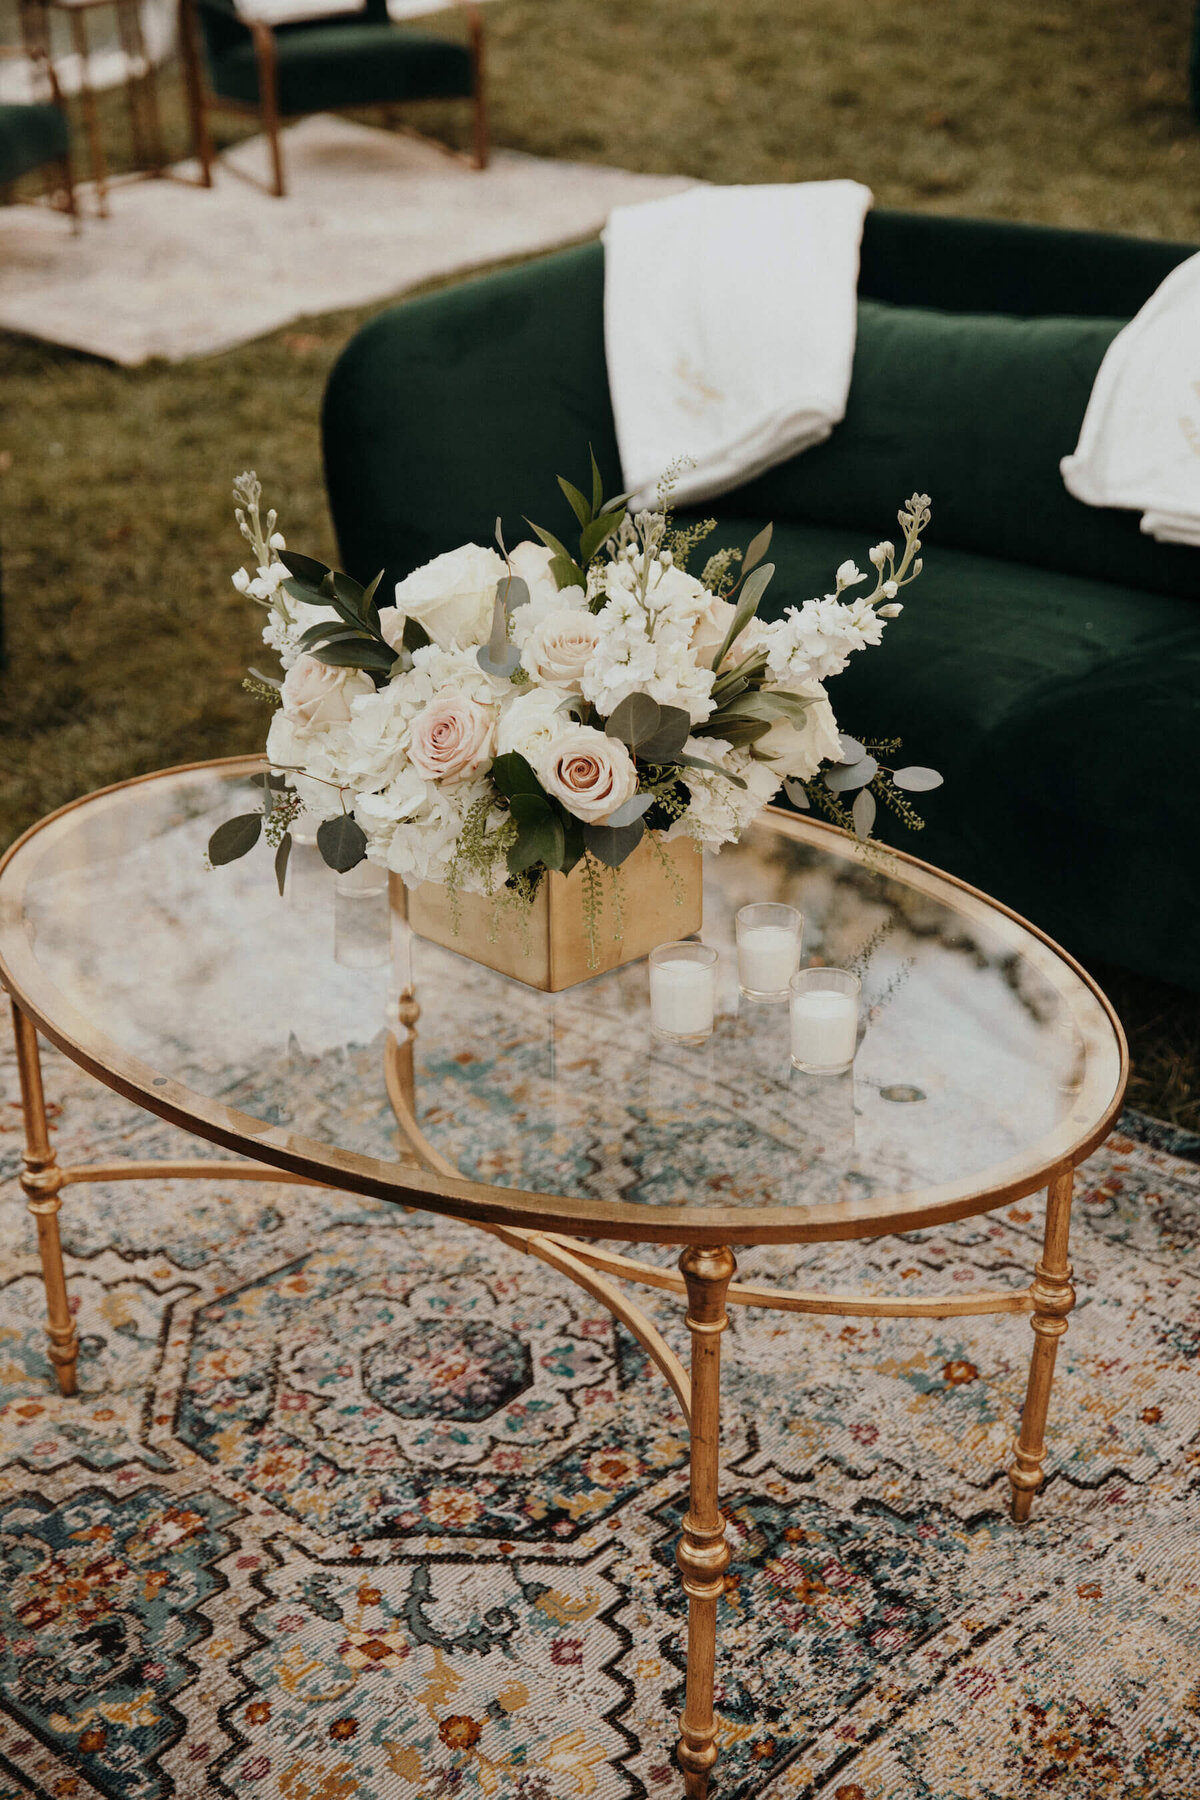 White, pink, green and gold wedding details with flowers and rug